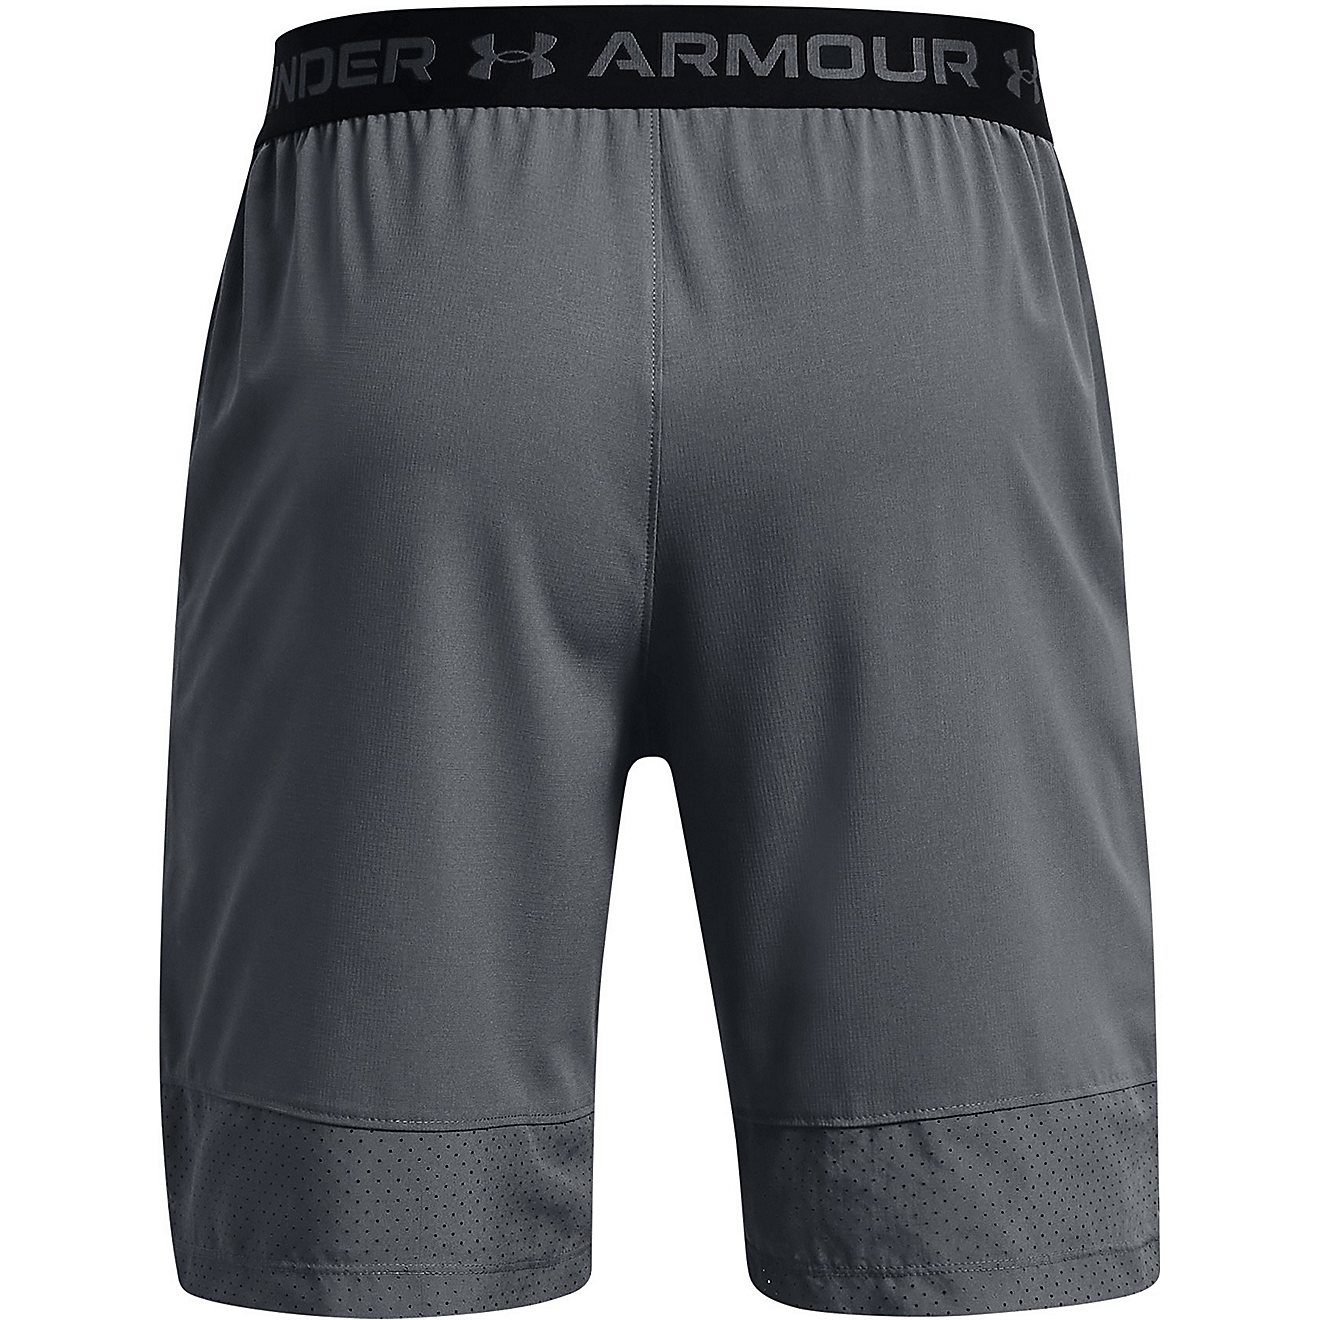 Under Armour Men's Vanish Woven Shorts | Free Shipping at Academy